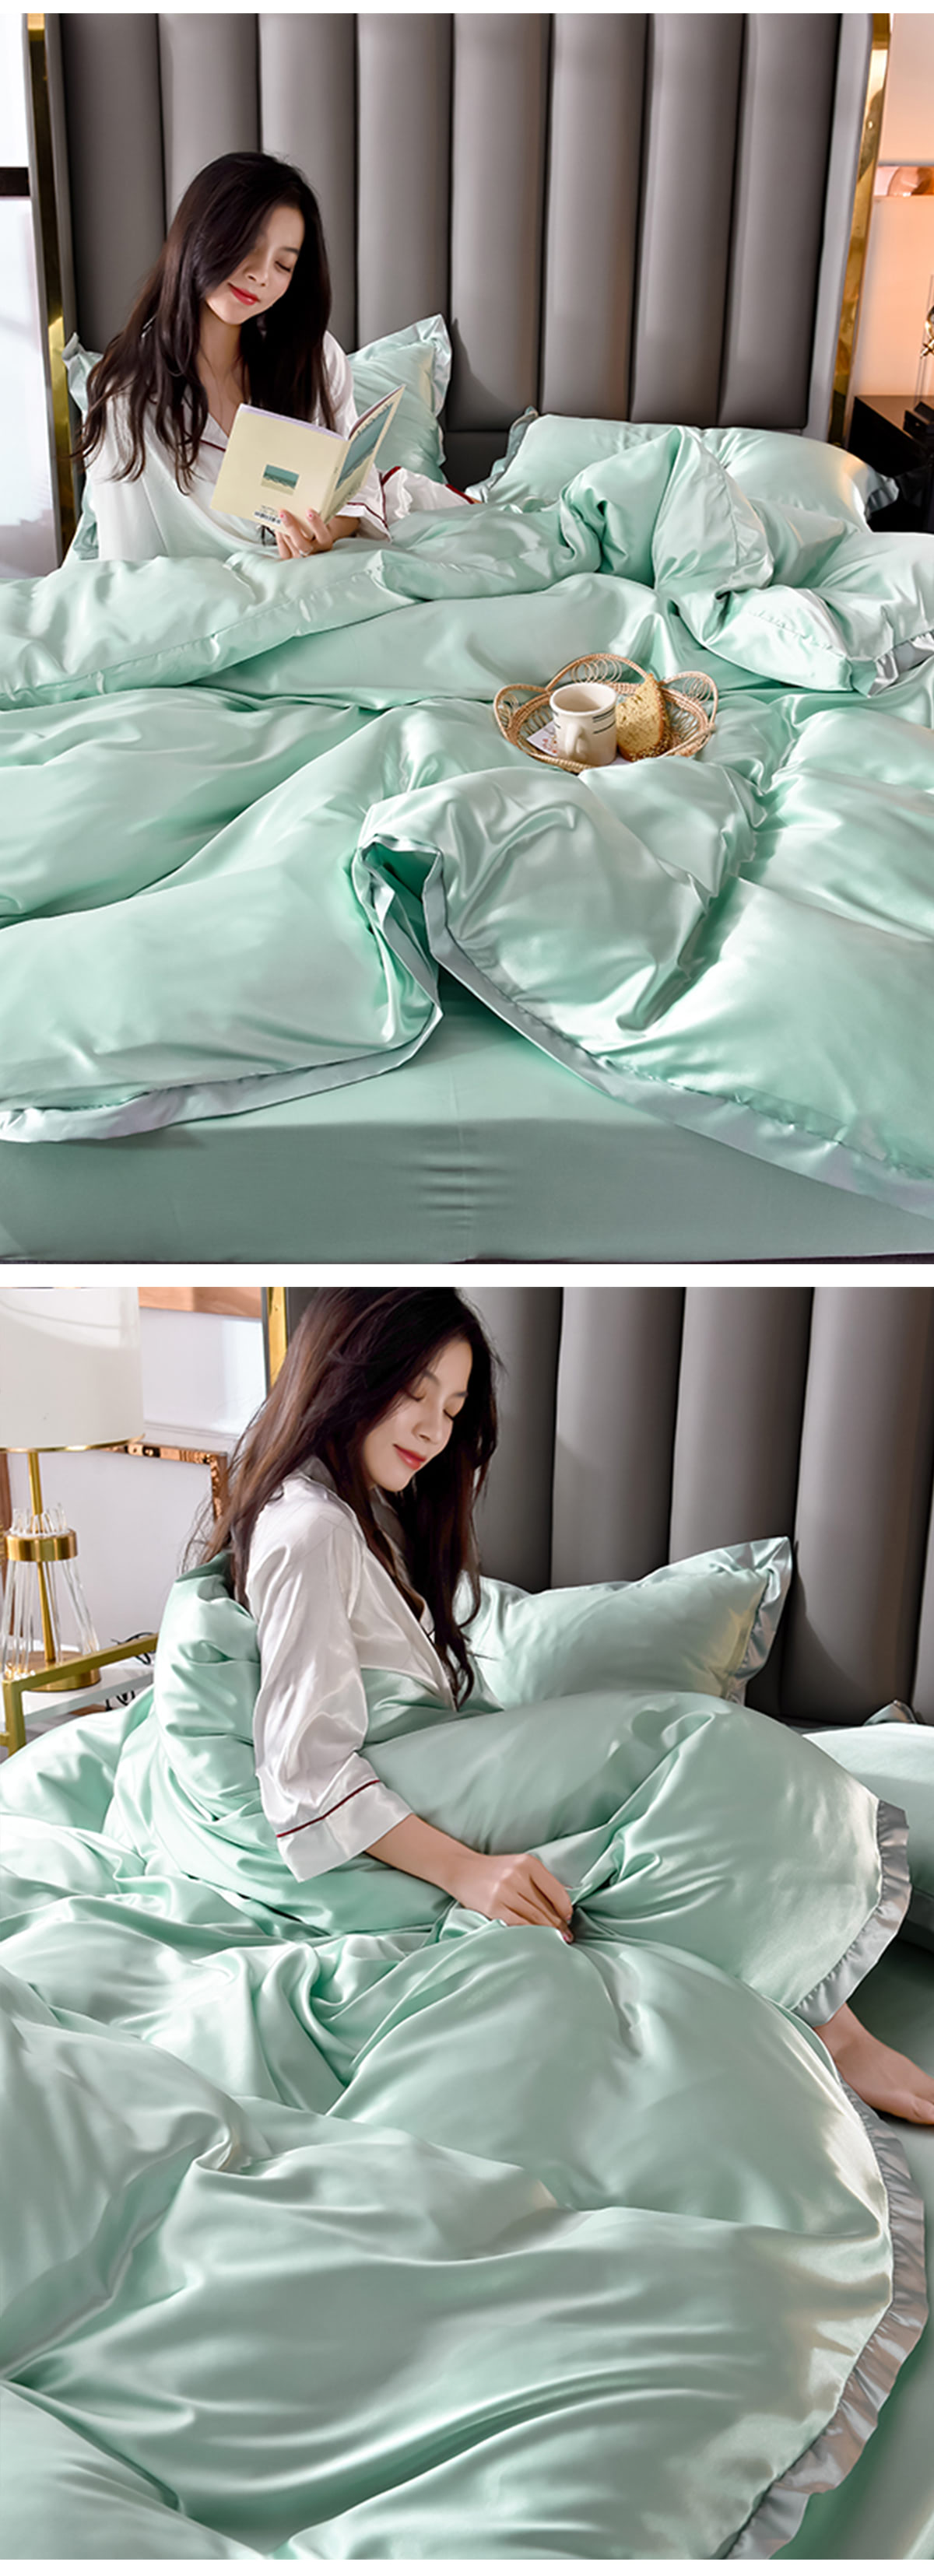 Fresh-and-Soft-Comfortable-Satin-Bed-Cover-Sheet-Set25.jpg